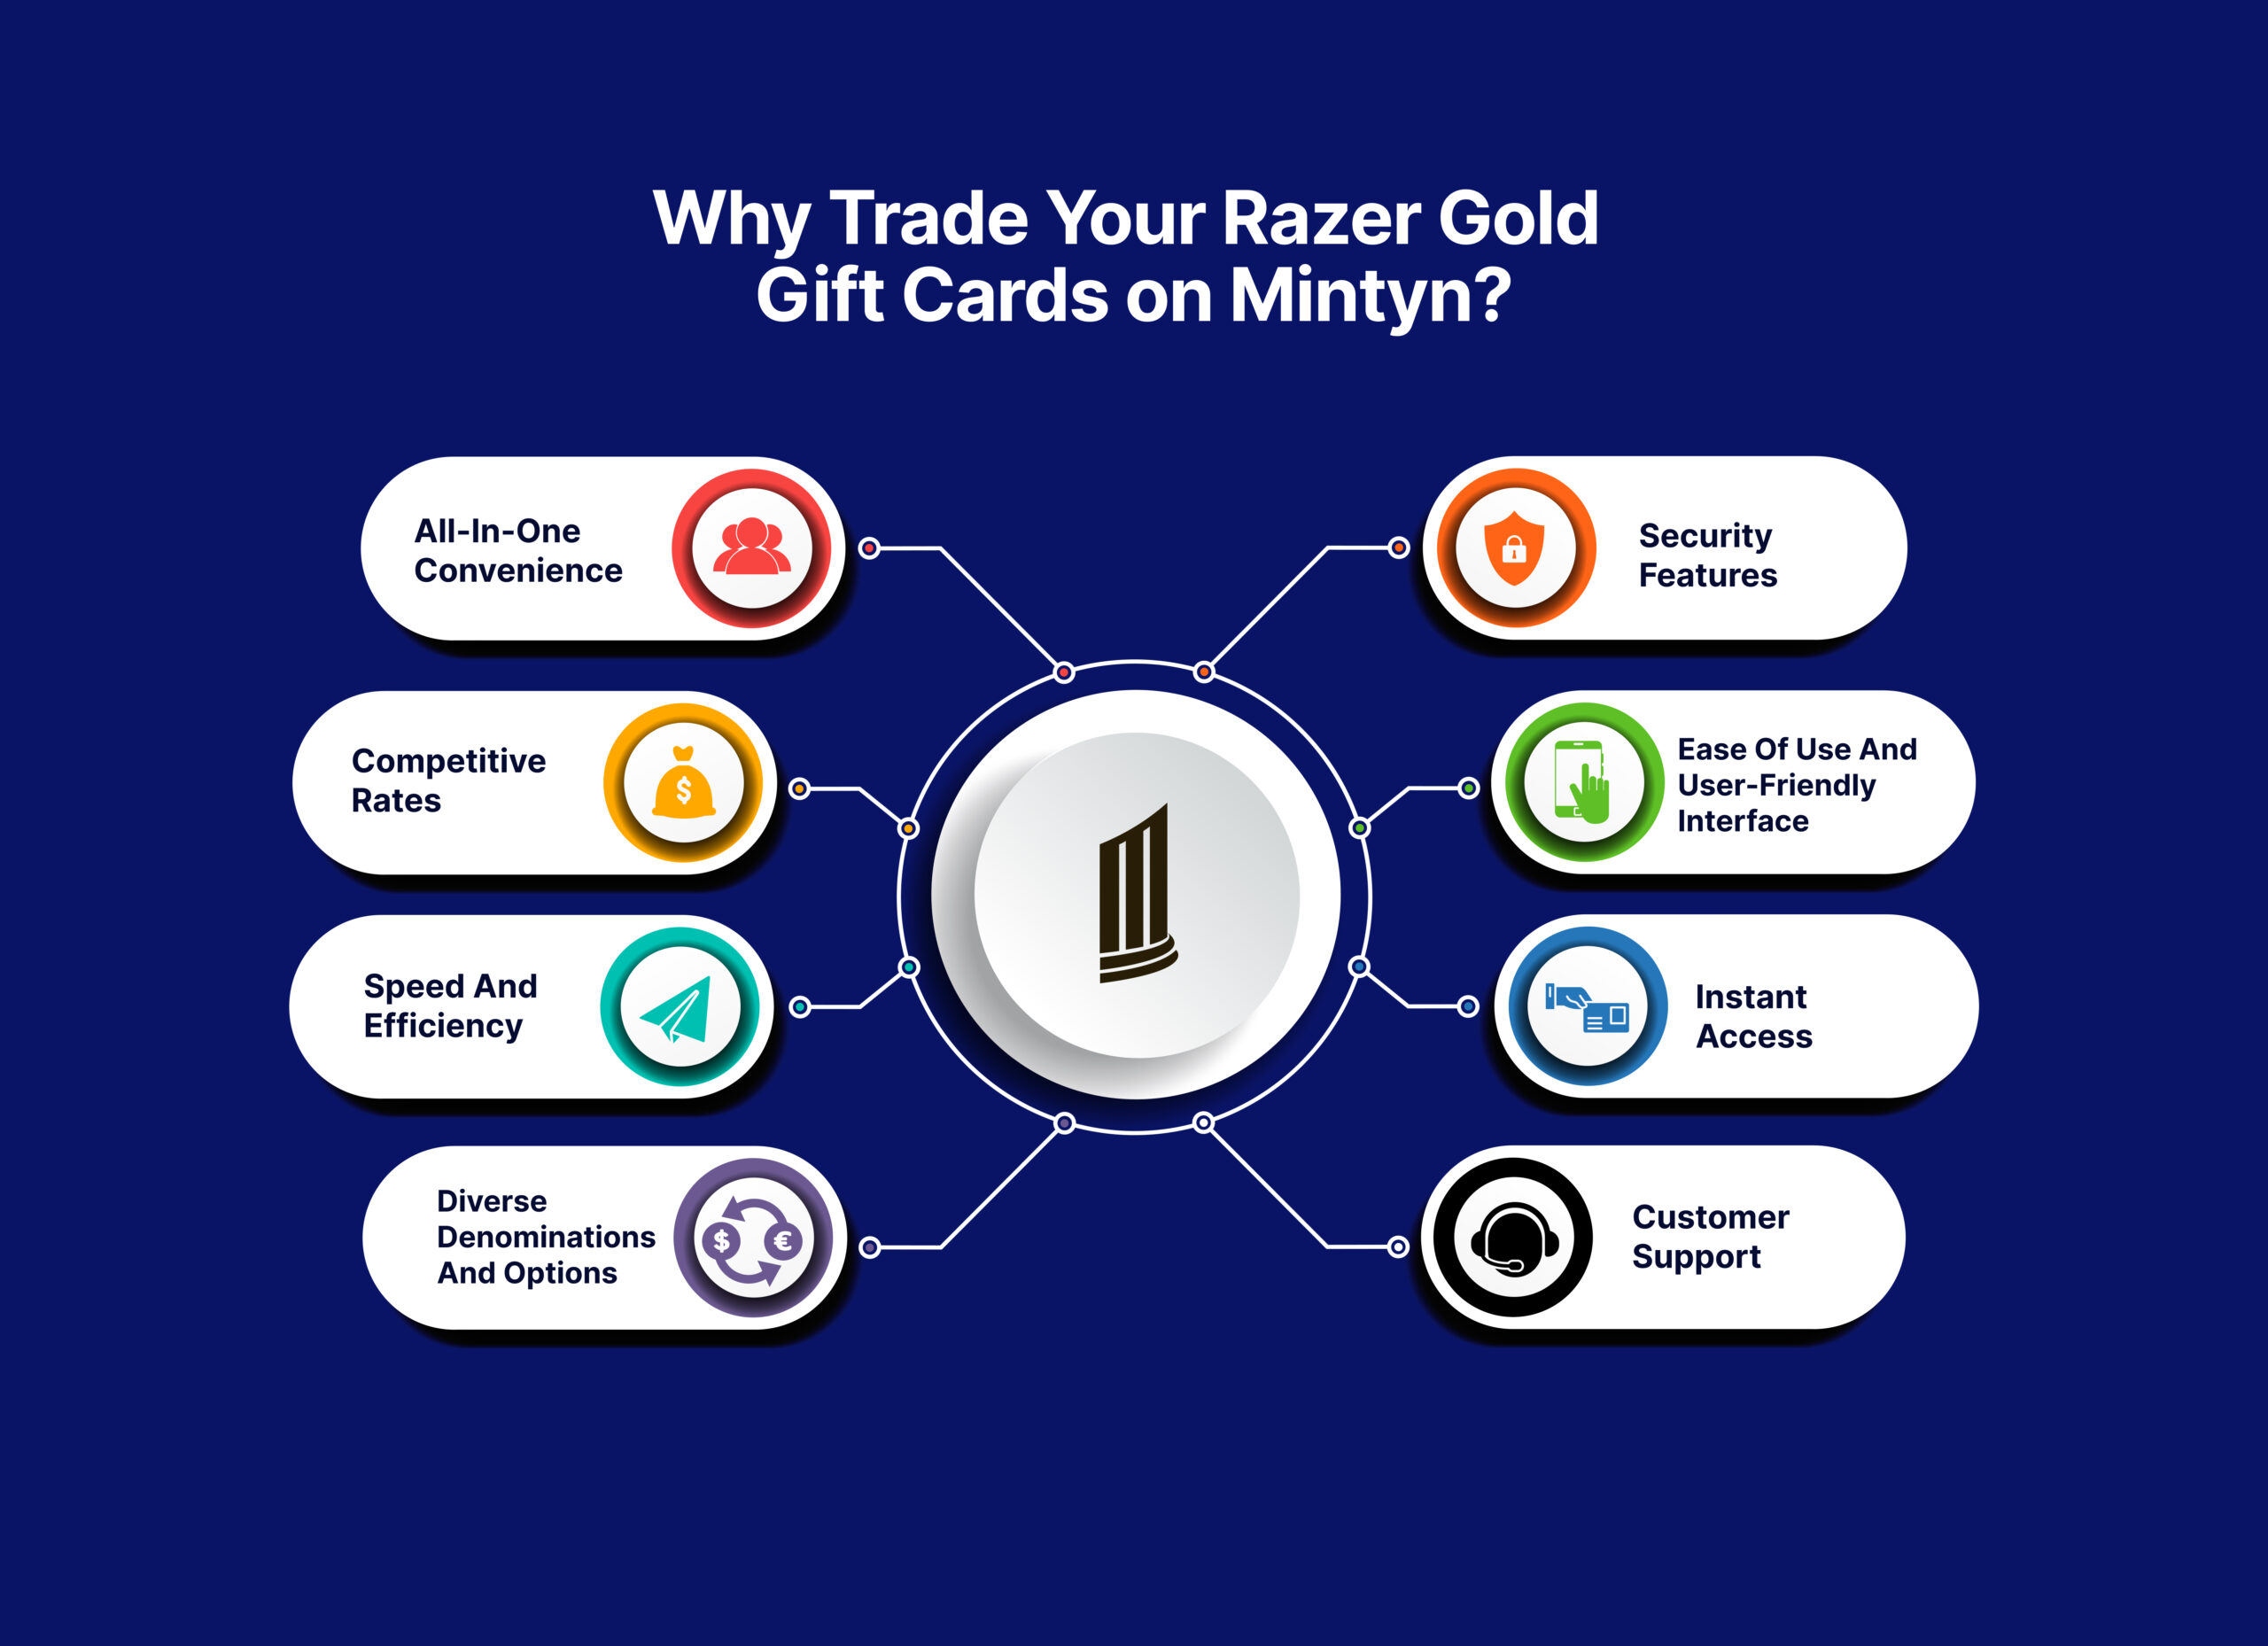 Why trade razer gold gift cards on Mintyn